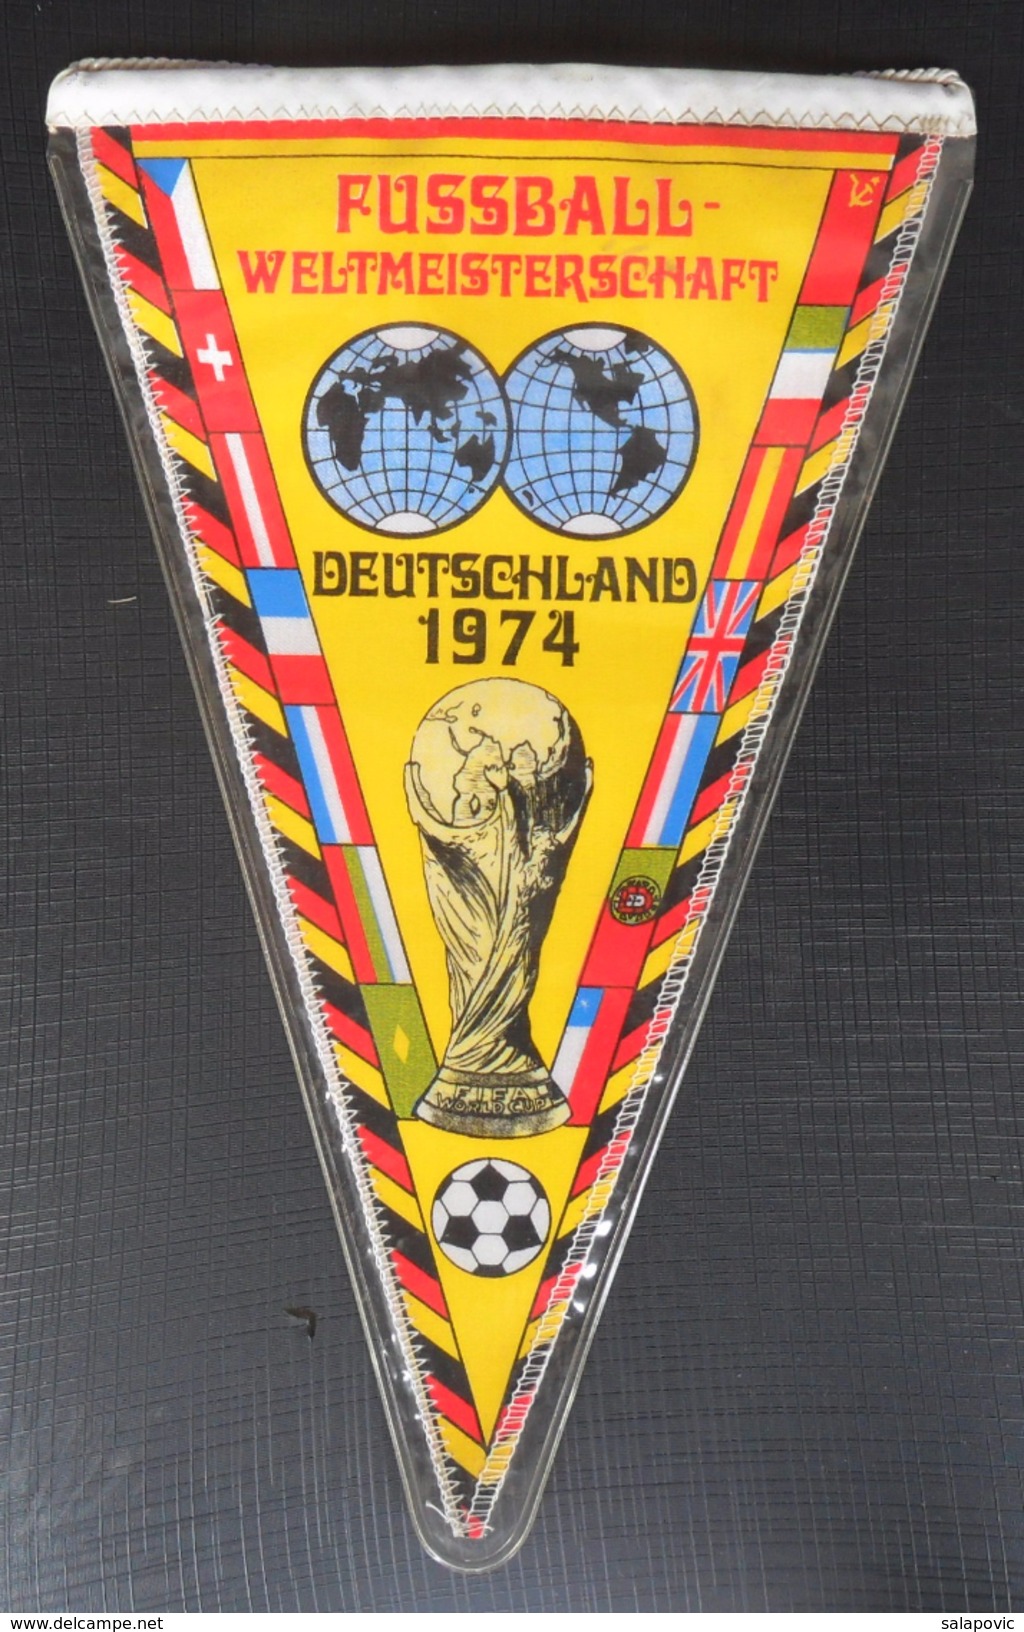 FIFA World Cup 1974 DEUTSCHLAND, GERMANY FOOTBALL CLUB CALCIO OLD PENNANT - Apparel, Souvenirs & Other